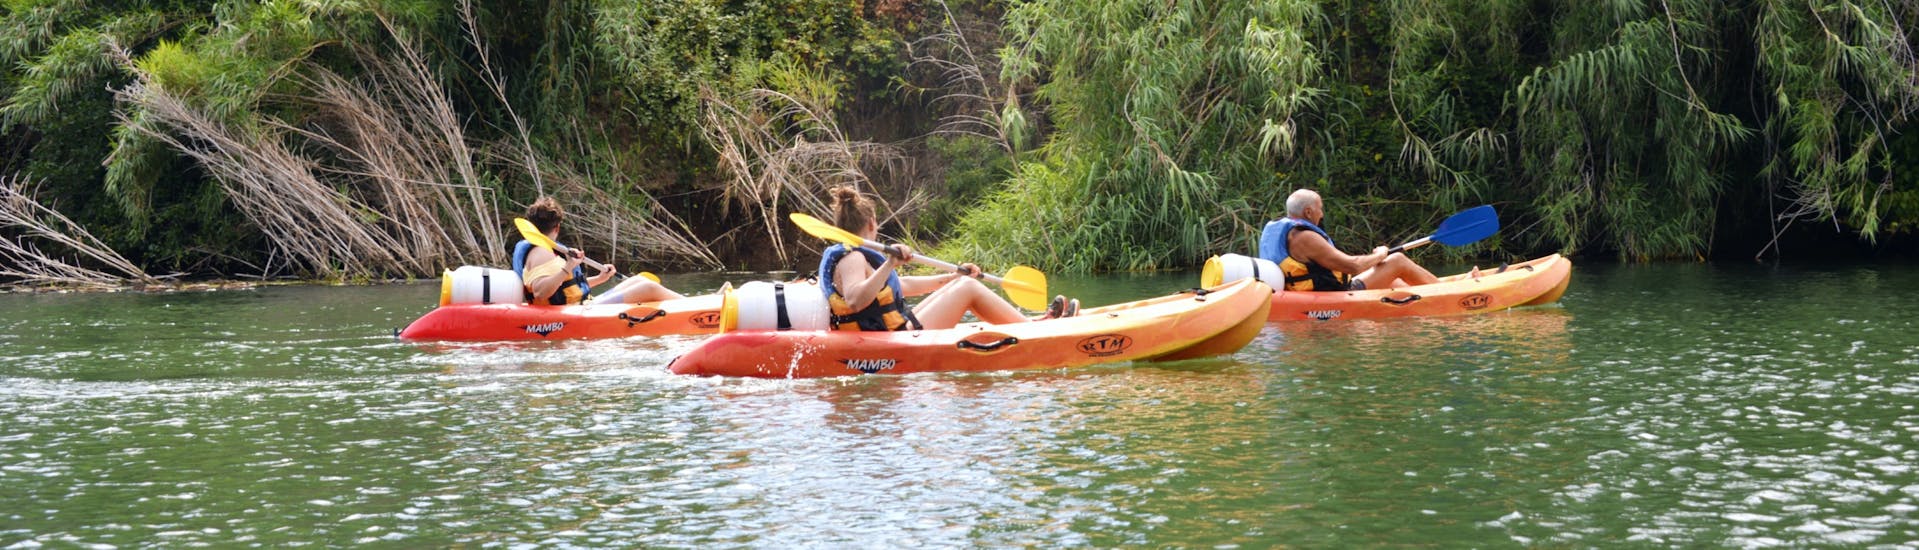 Friends are enjoying their Kayak & Canoe on Argens River to Saint-Aygulf Beach - 9km with Kayak Paddle Fréjus.